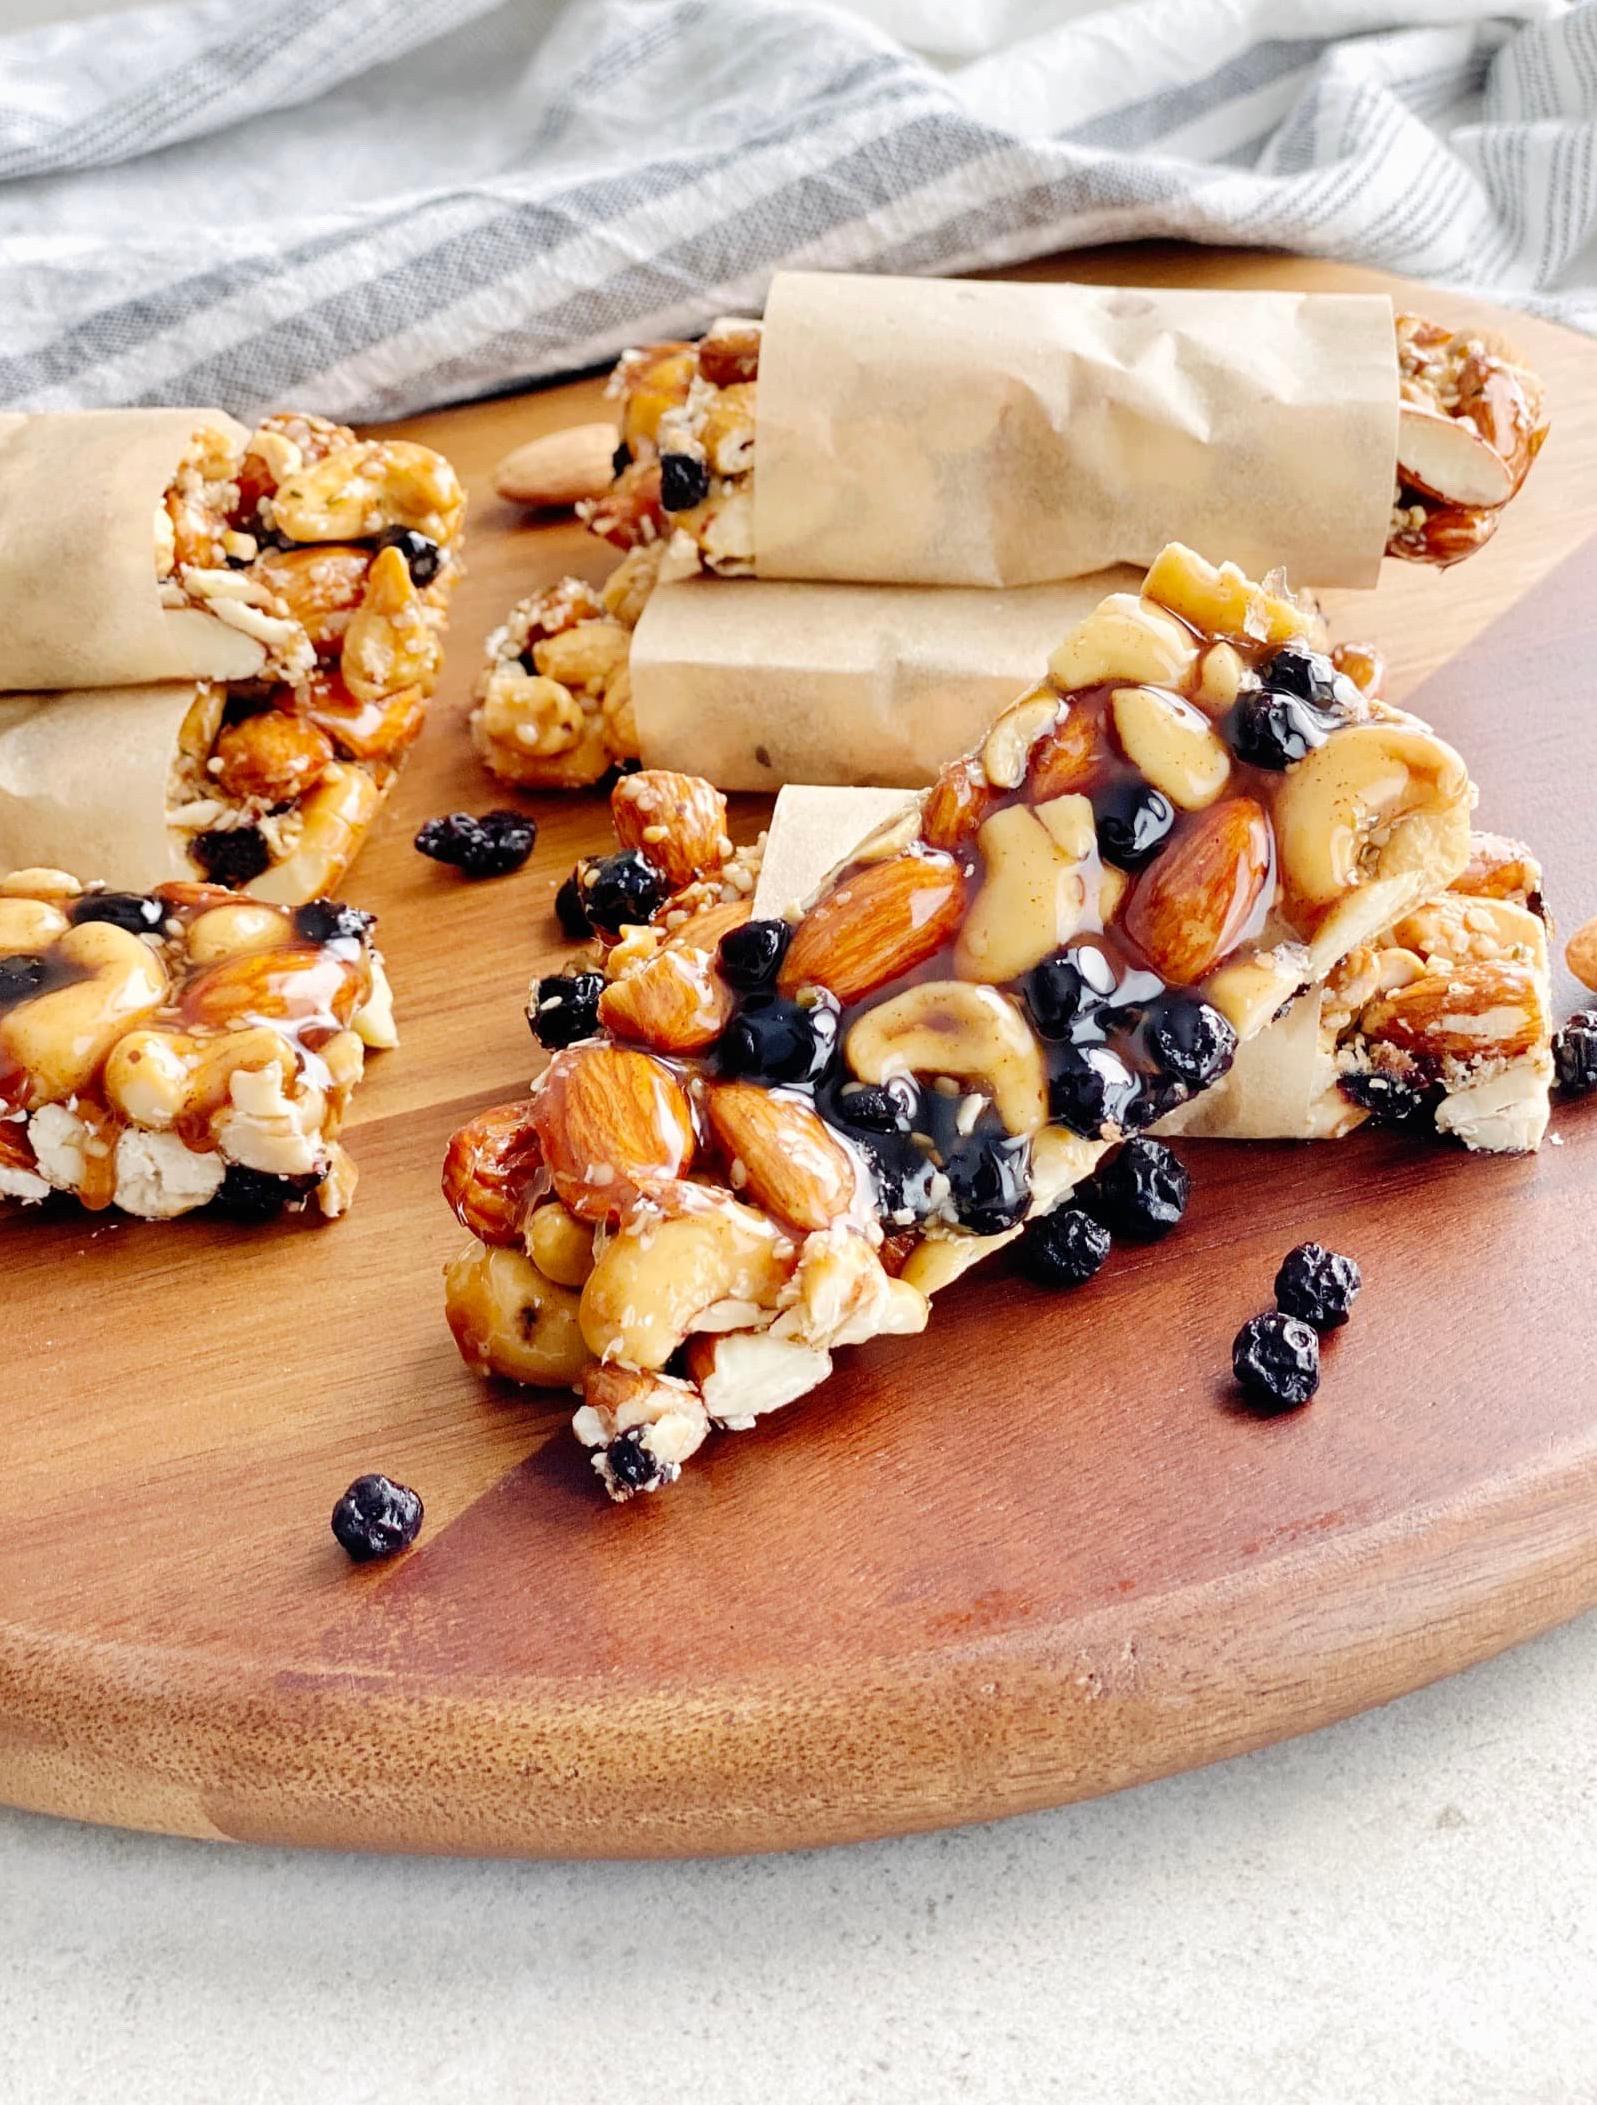  Say goodbye to prepackaged snacks and hello to homemade goodness!